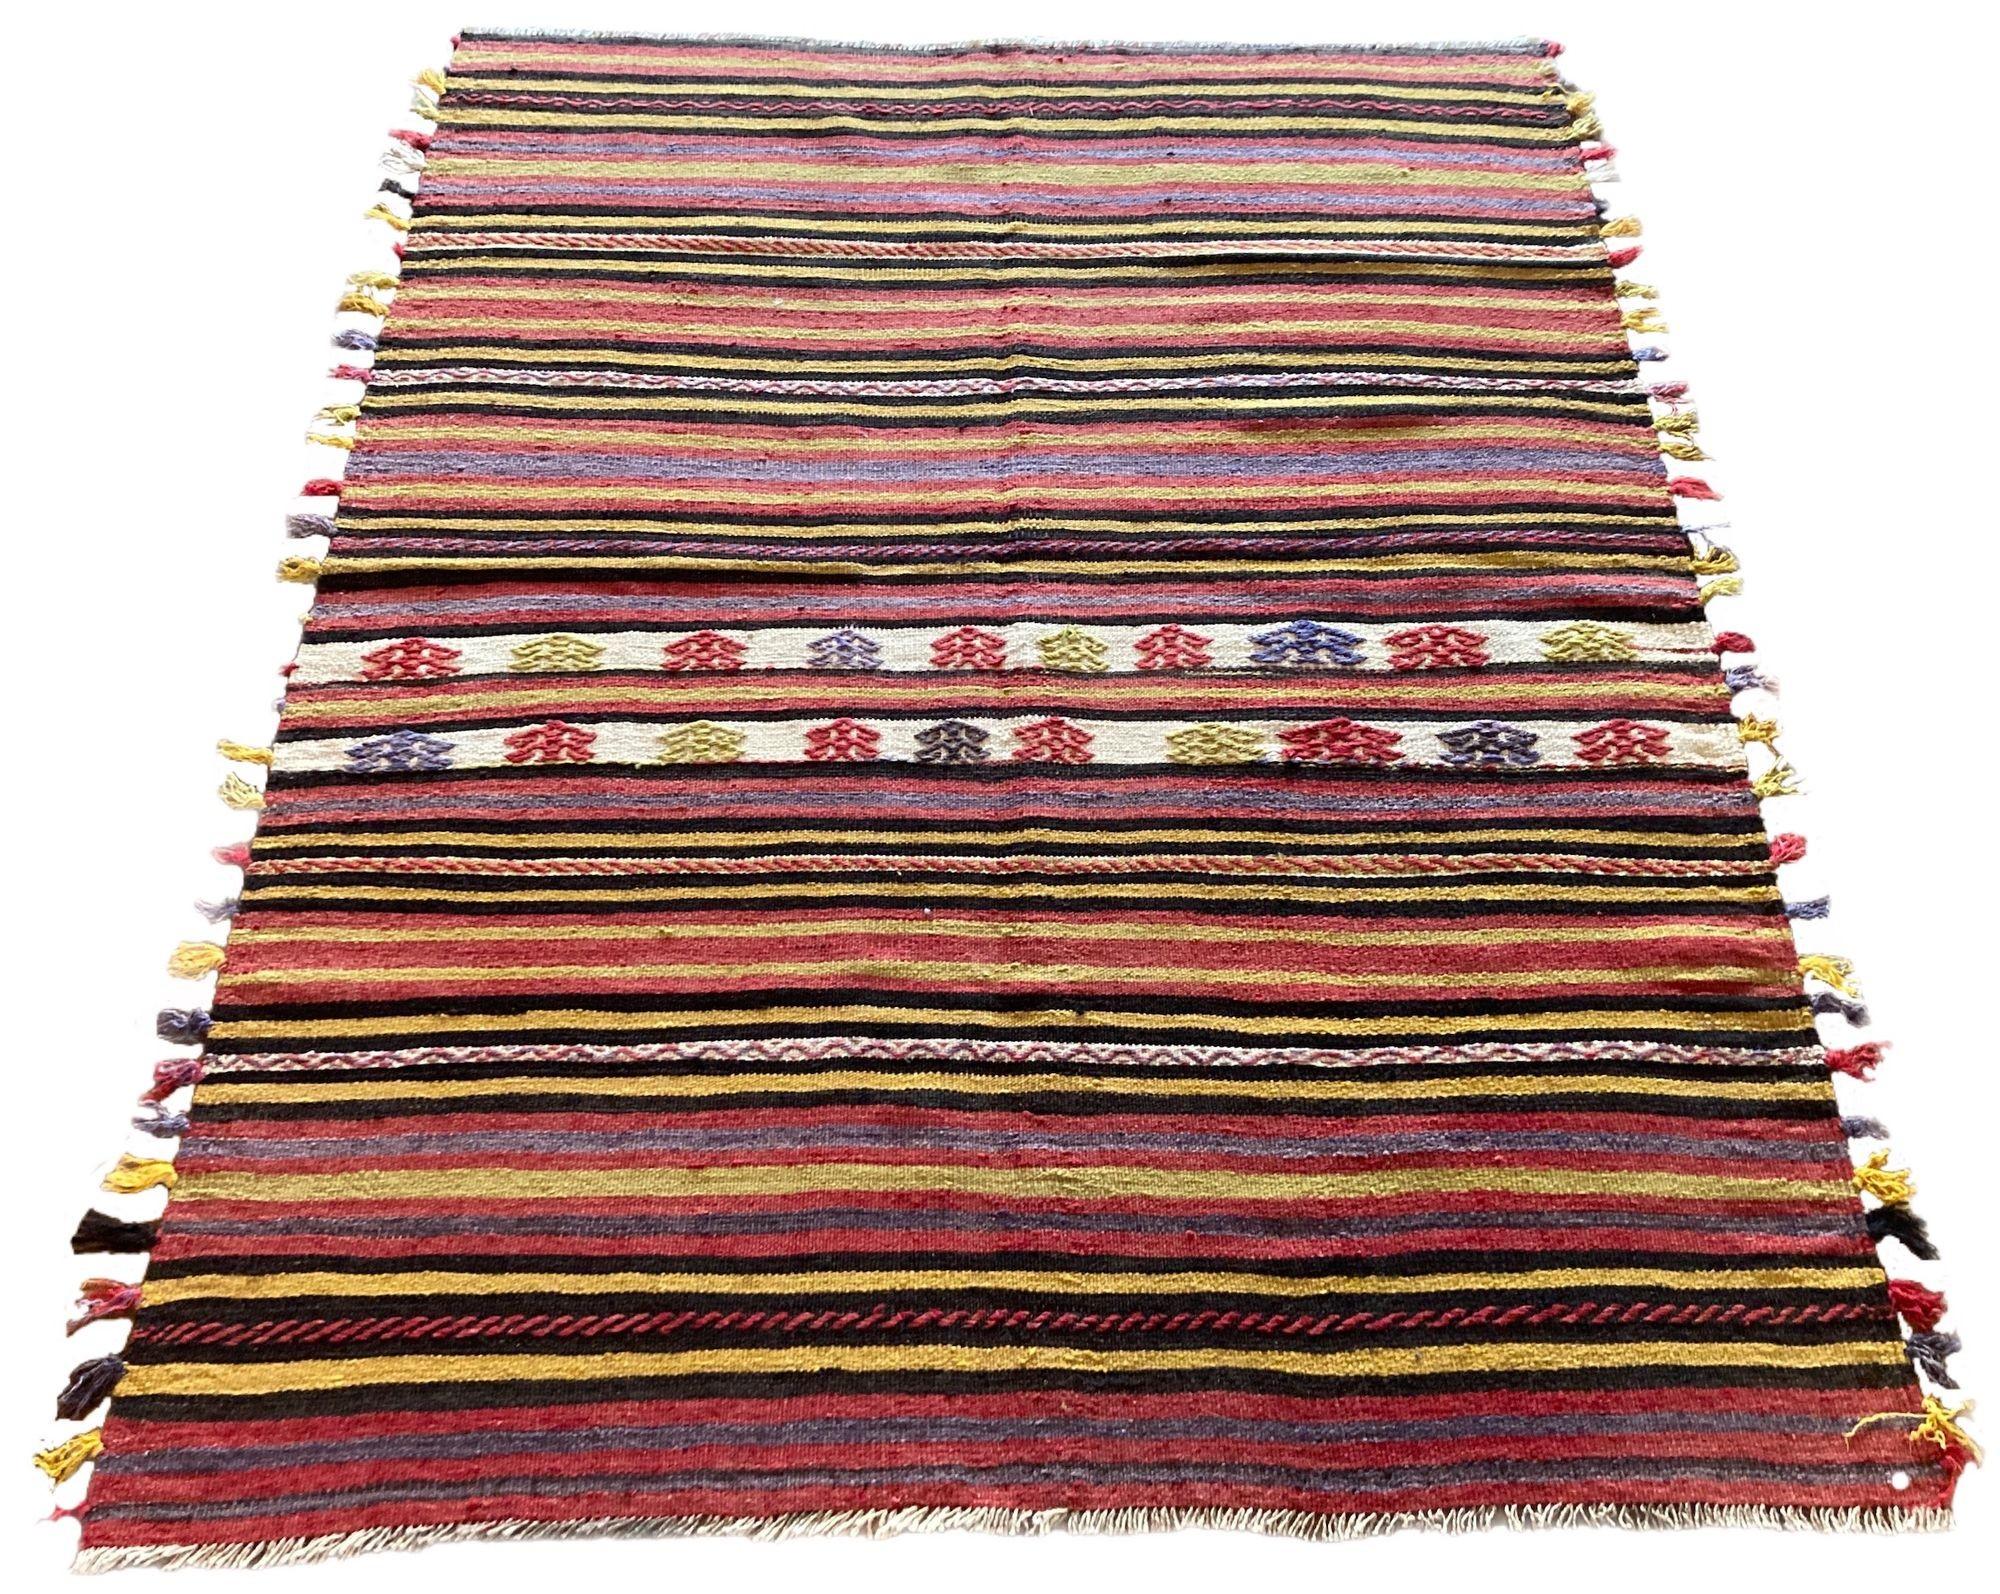 A lovely vintage kilim, handwoven in central Turkey circa 1960 featuring a multicoloured banded design in reds, greys and golds. Note the funky tassels along each side!
Size: 1.77m x 1.38m (5ft 9in x 4ft 6in)
This kilim is in good condition with